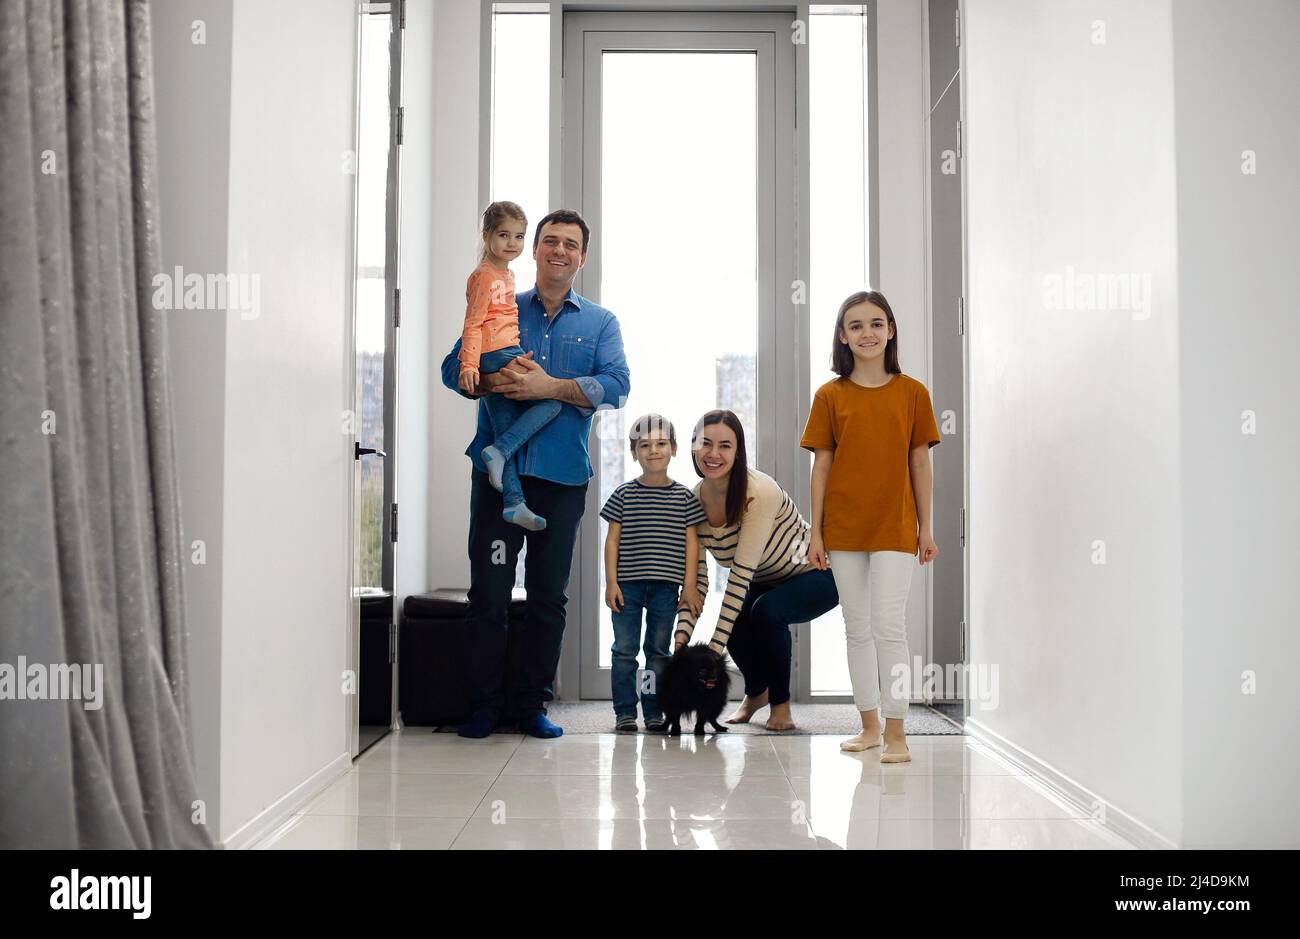 Excited kids arriving home with their parents. Children returning home with parents mom and dad, smiling cute children brother and sisters, entering a Stock Photo